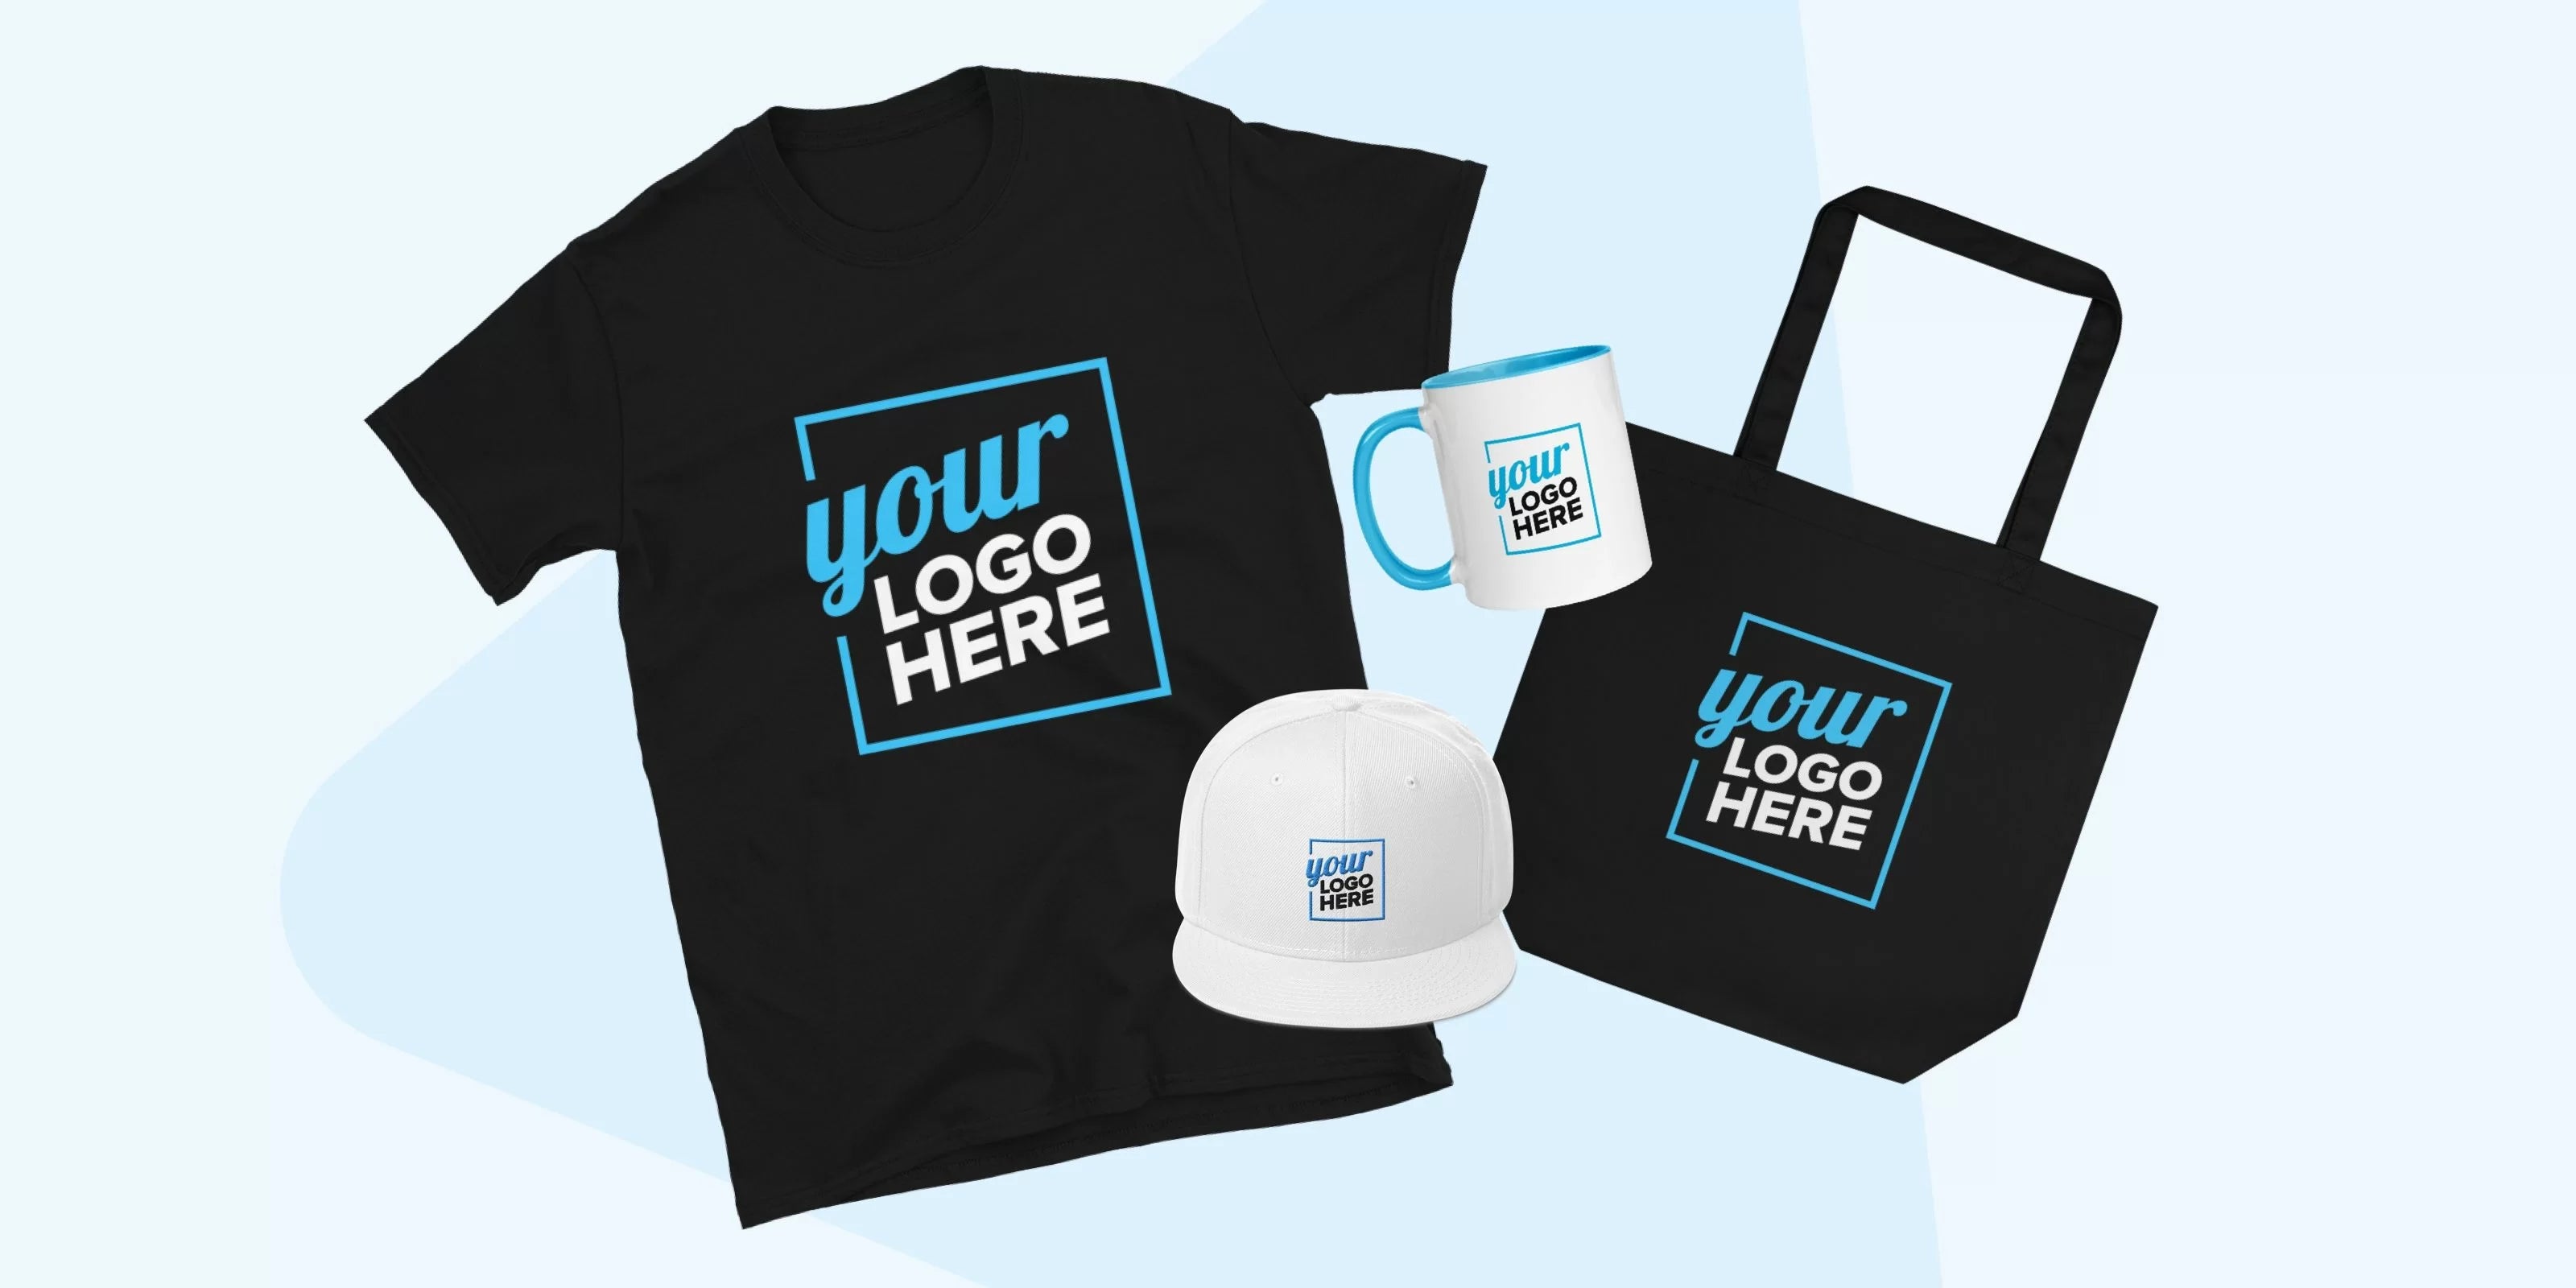 Customizable promotional products featuring a company logo.